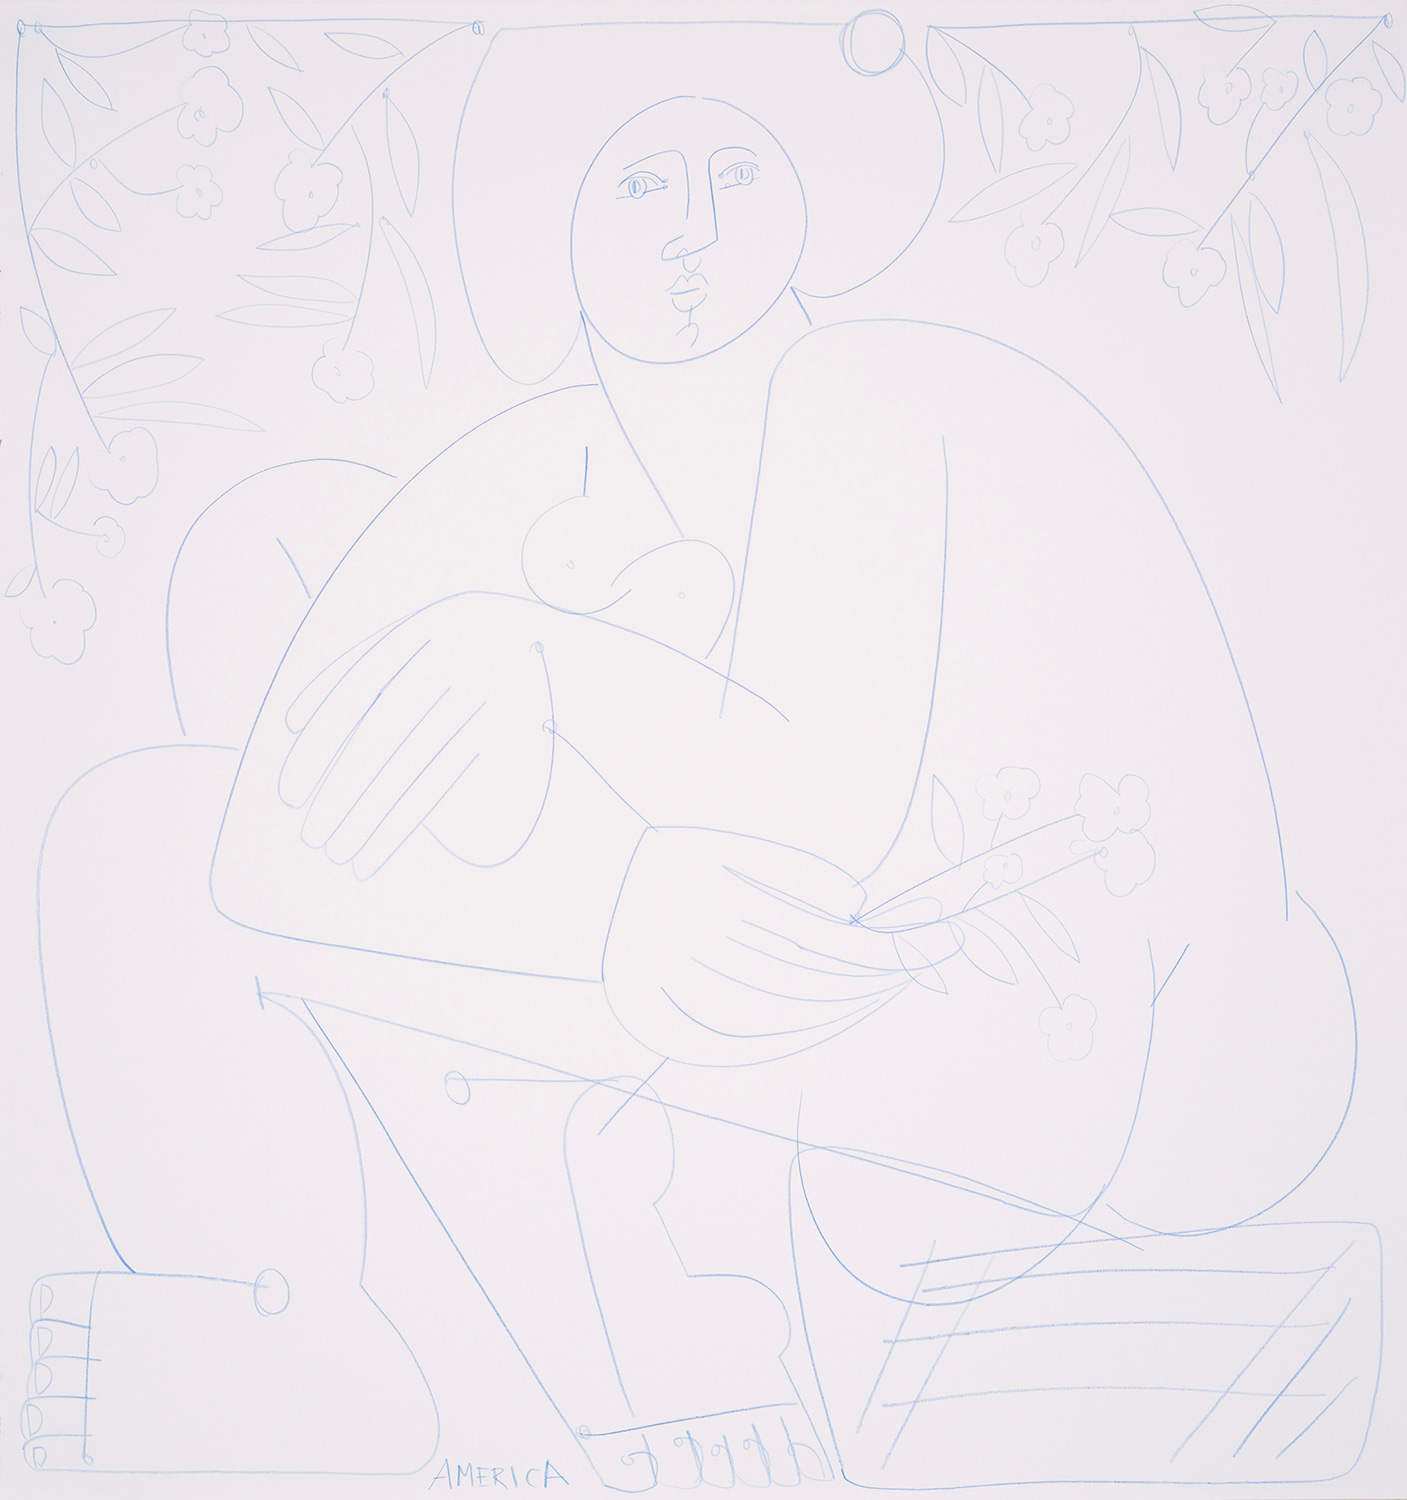 Woman Sits and Looks About_America Martin_Blue Chalk on Paper_23.5 x 22